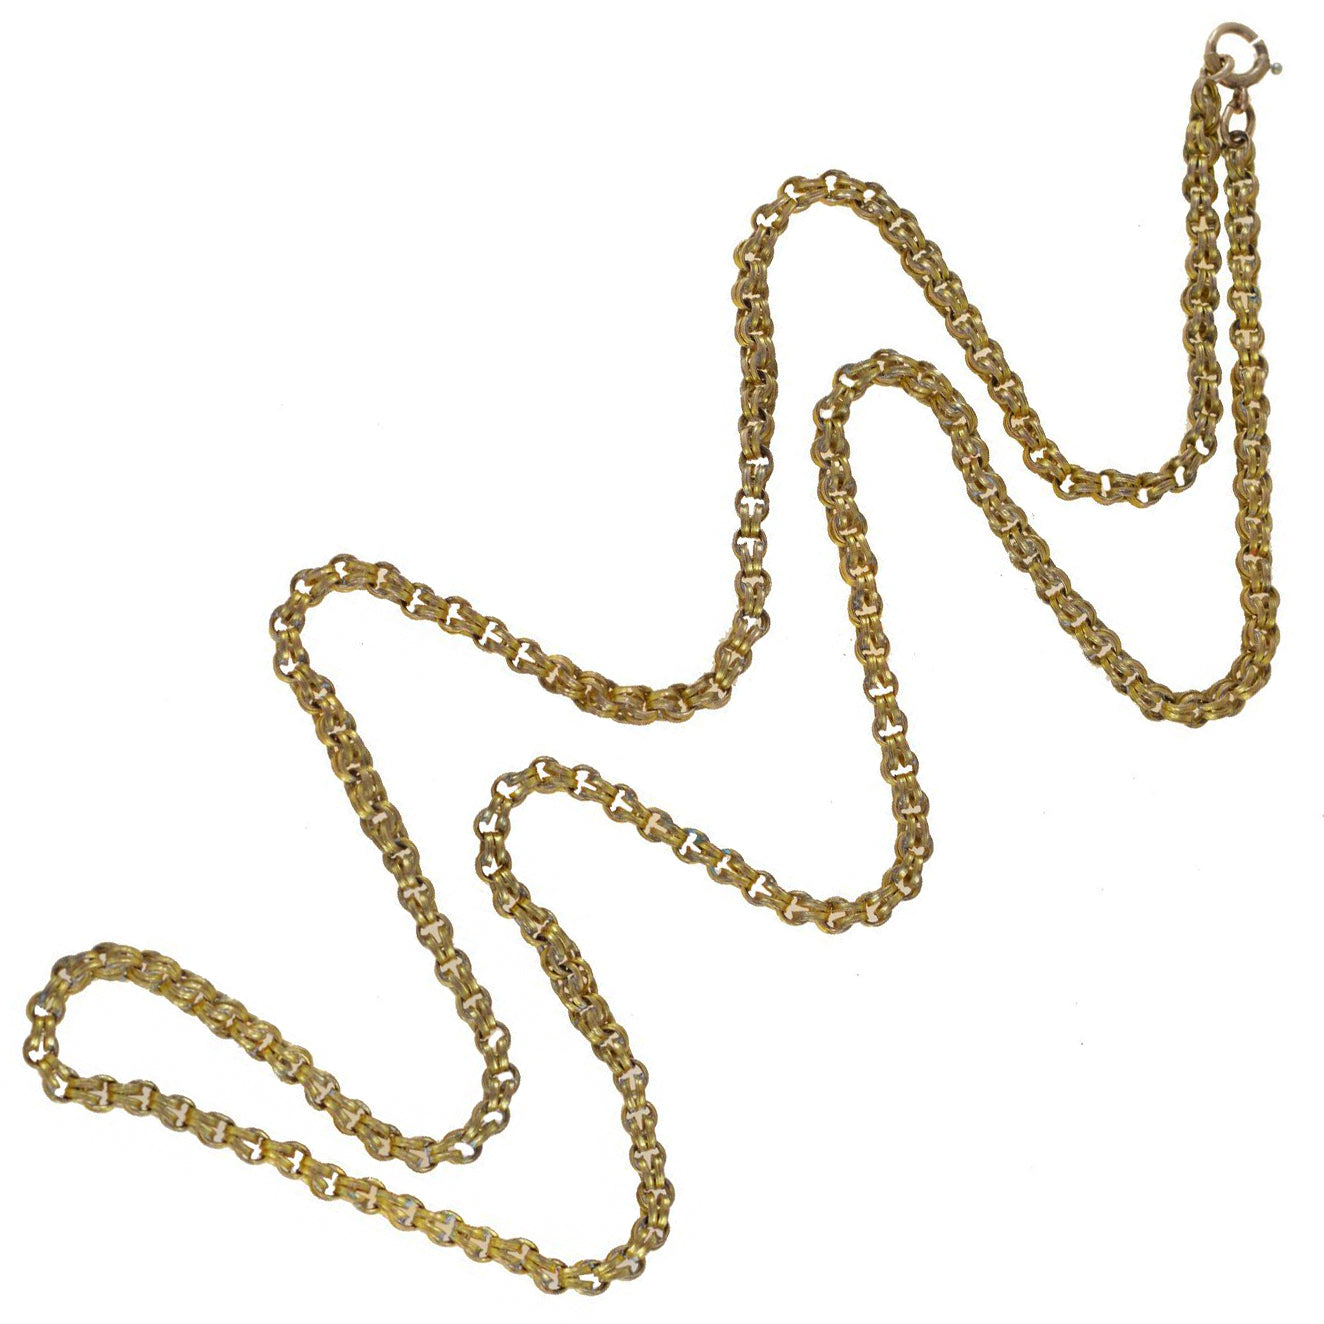 Victorian Gold-Filled Double Link Chain Necklace 30.5